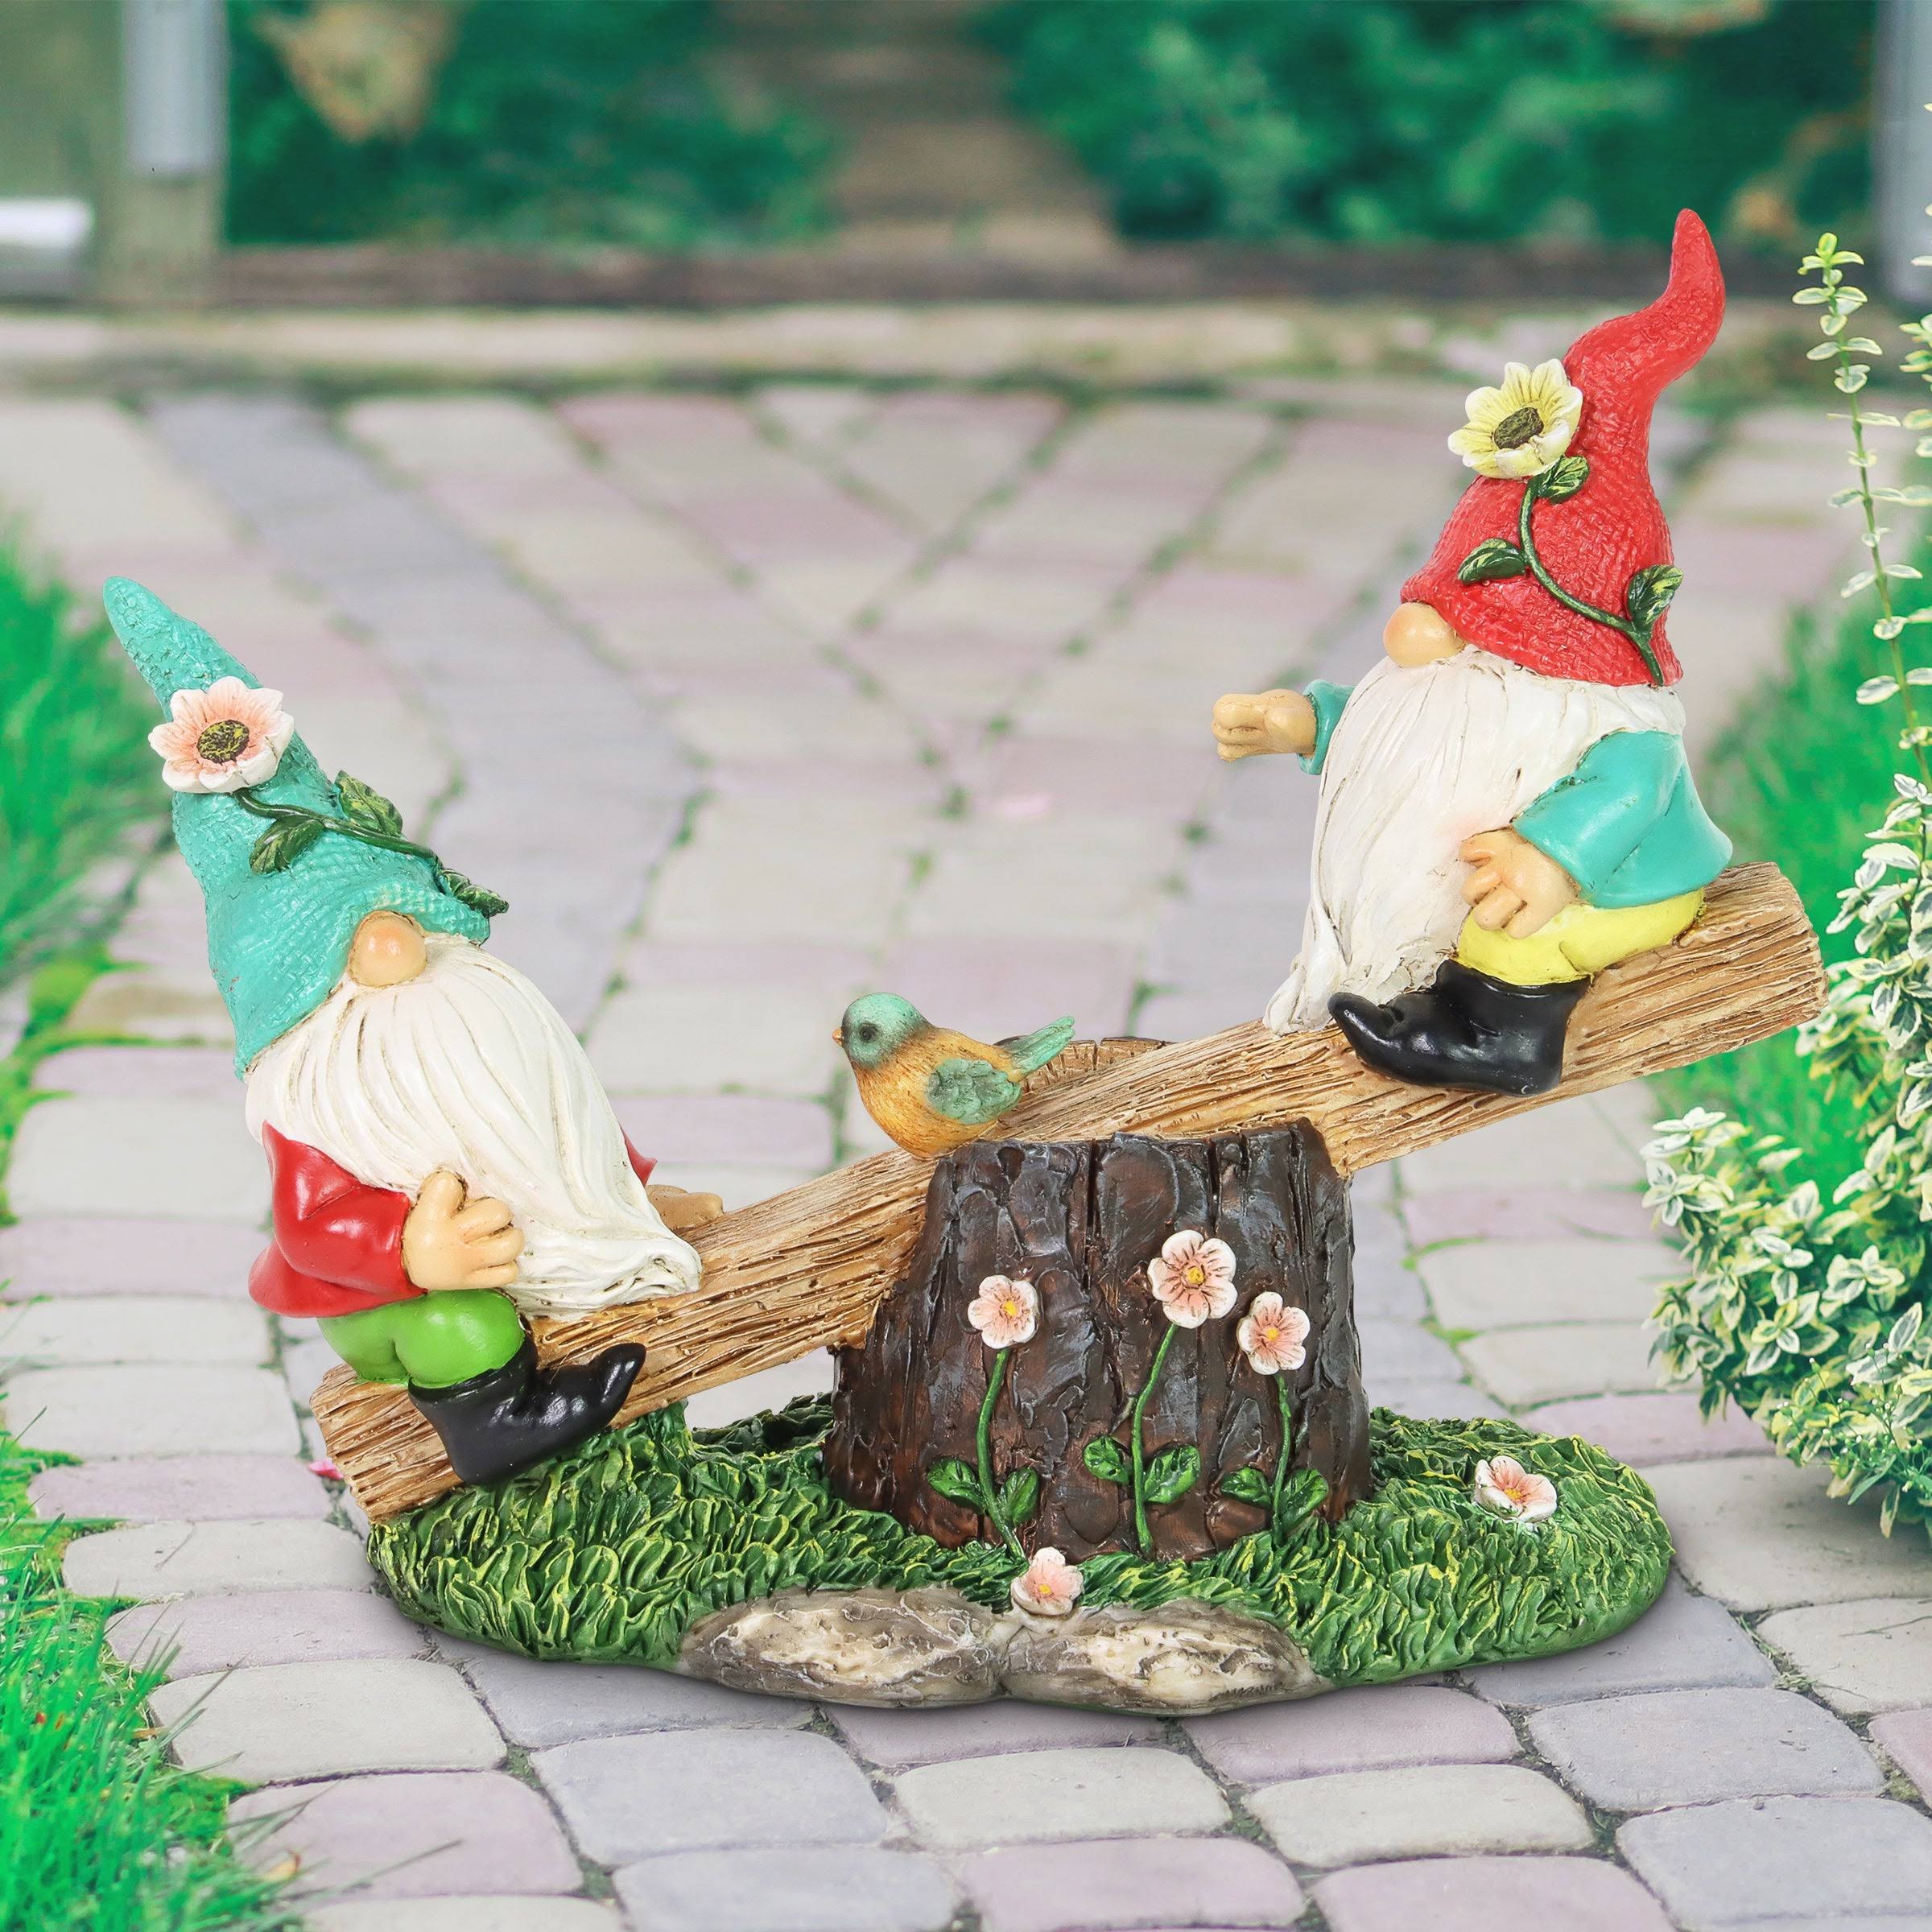 Exhart Two Can't See Hat Seesaw Gnomes Garden Statuary, 10.5 by 9 Inches - Multi - Resin